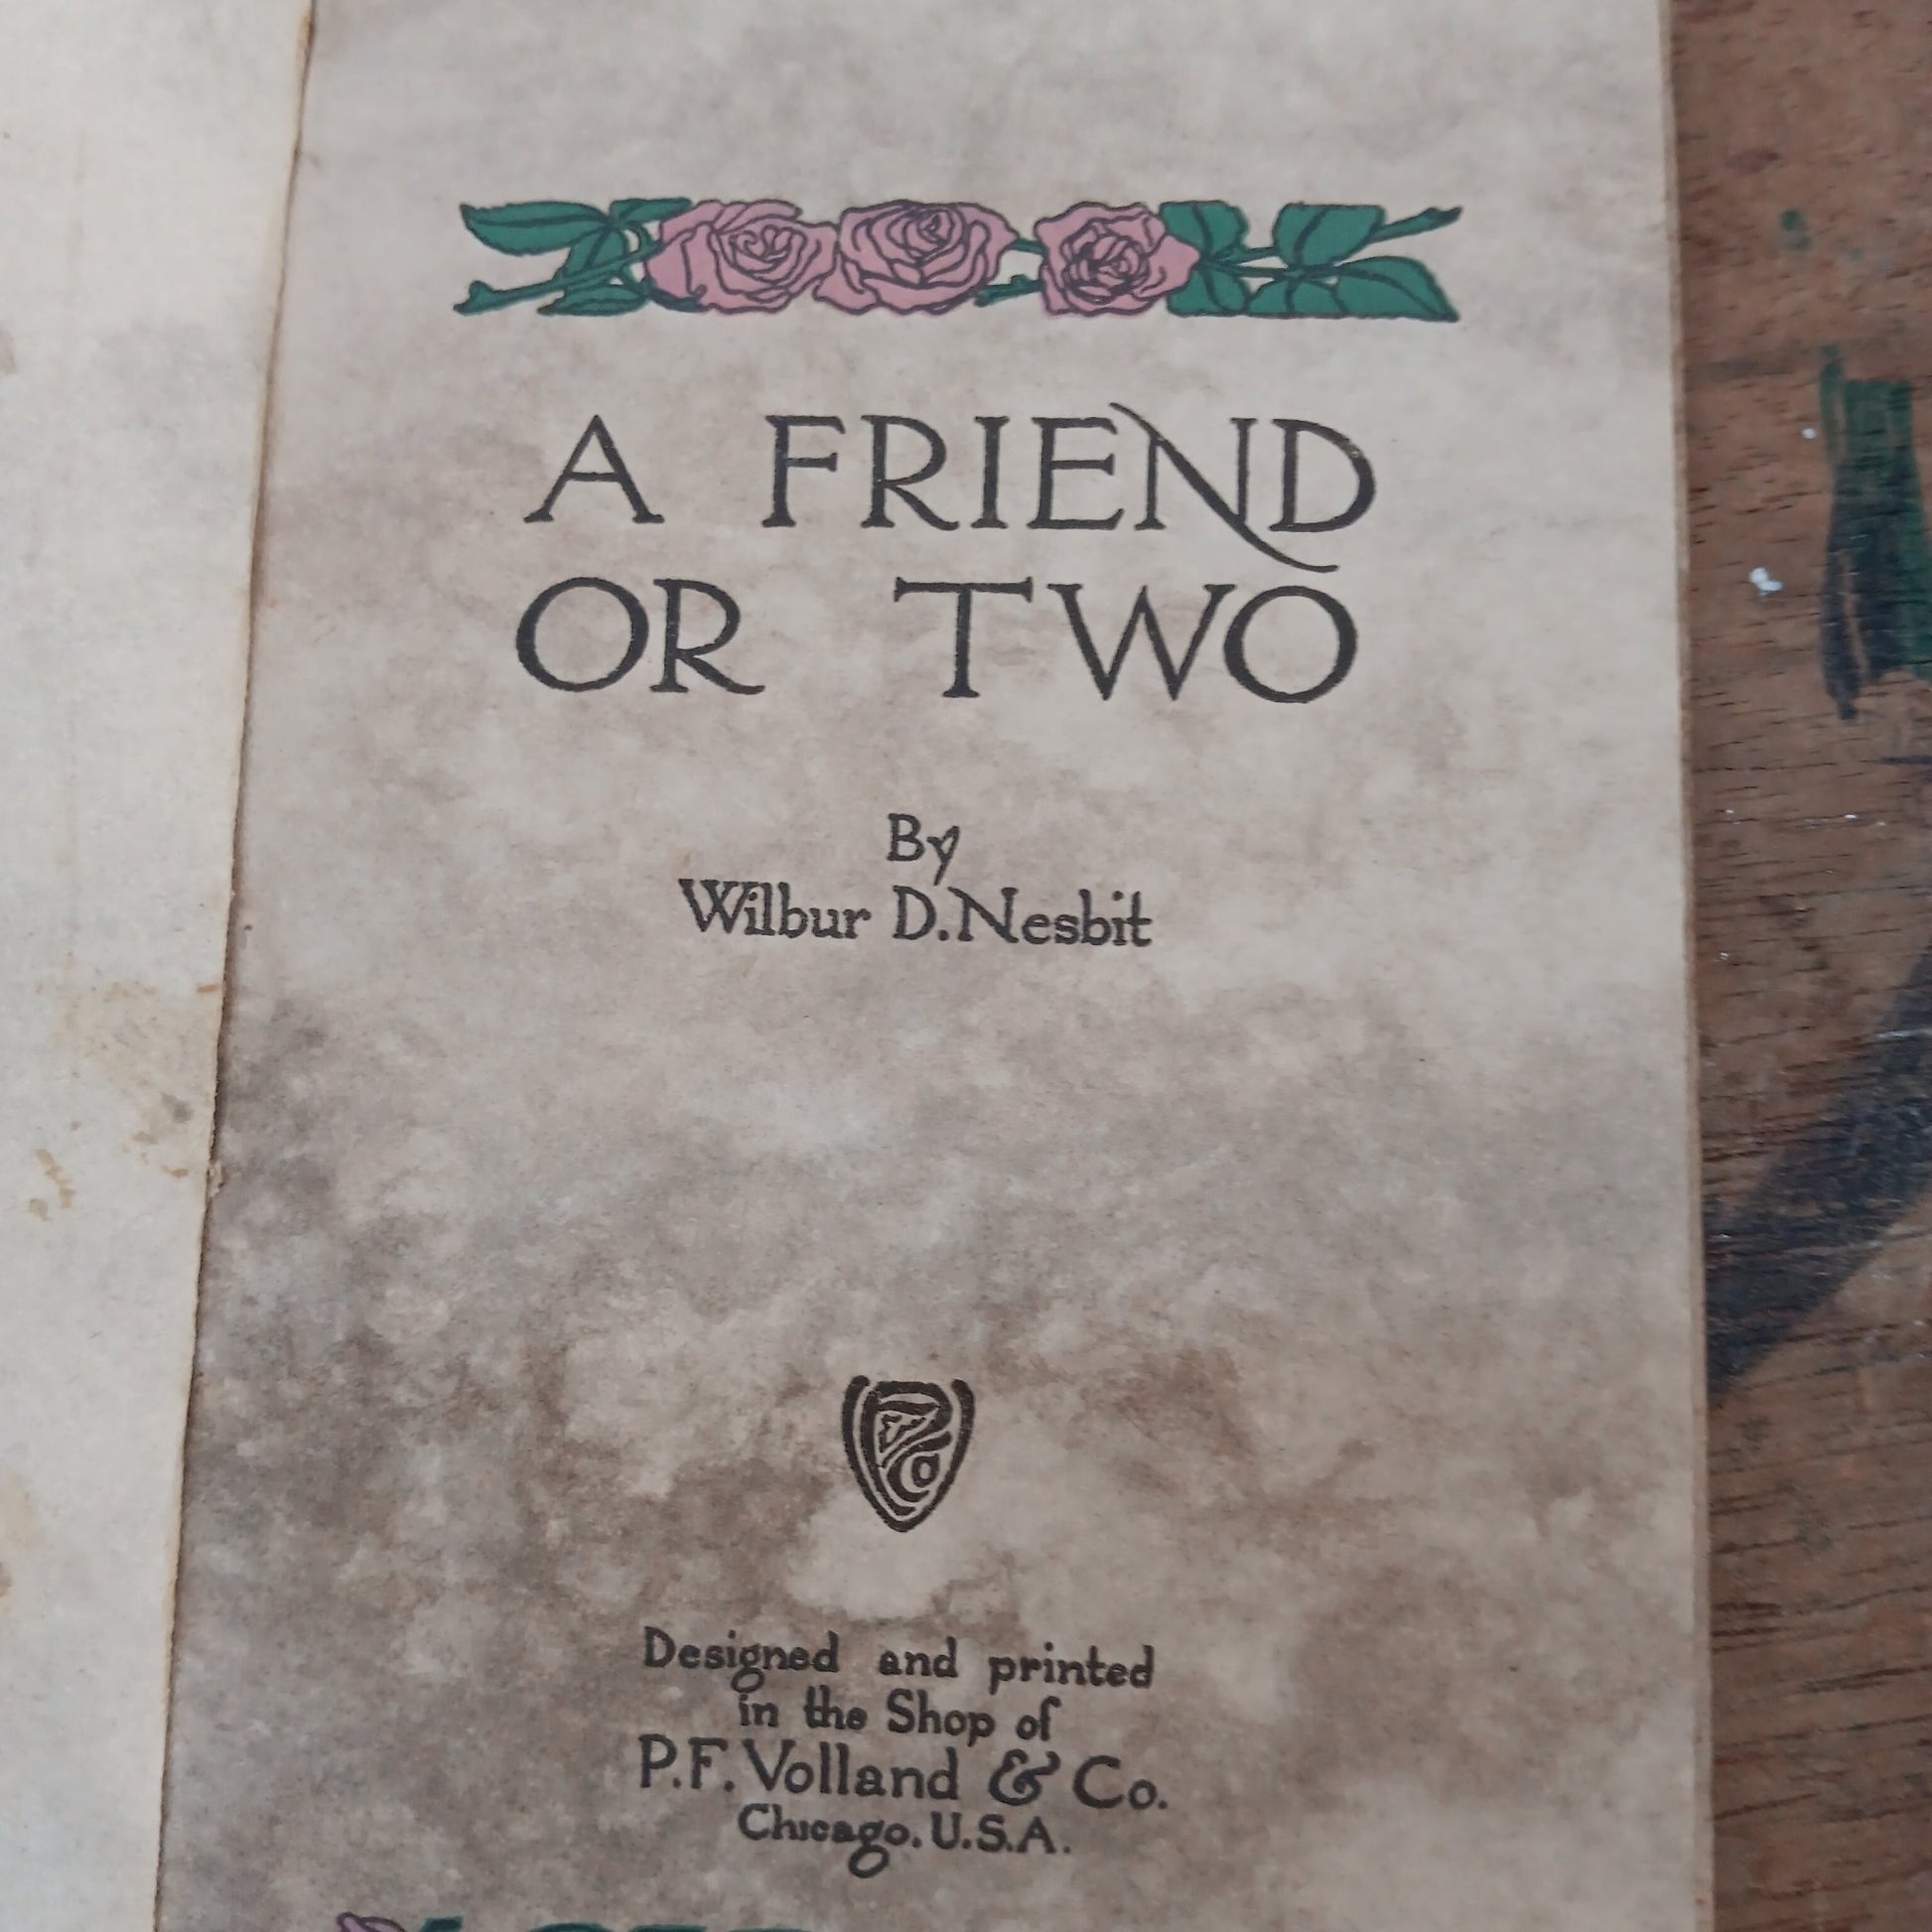 A Friend or Two - [ash-ling] Booksellers